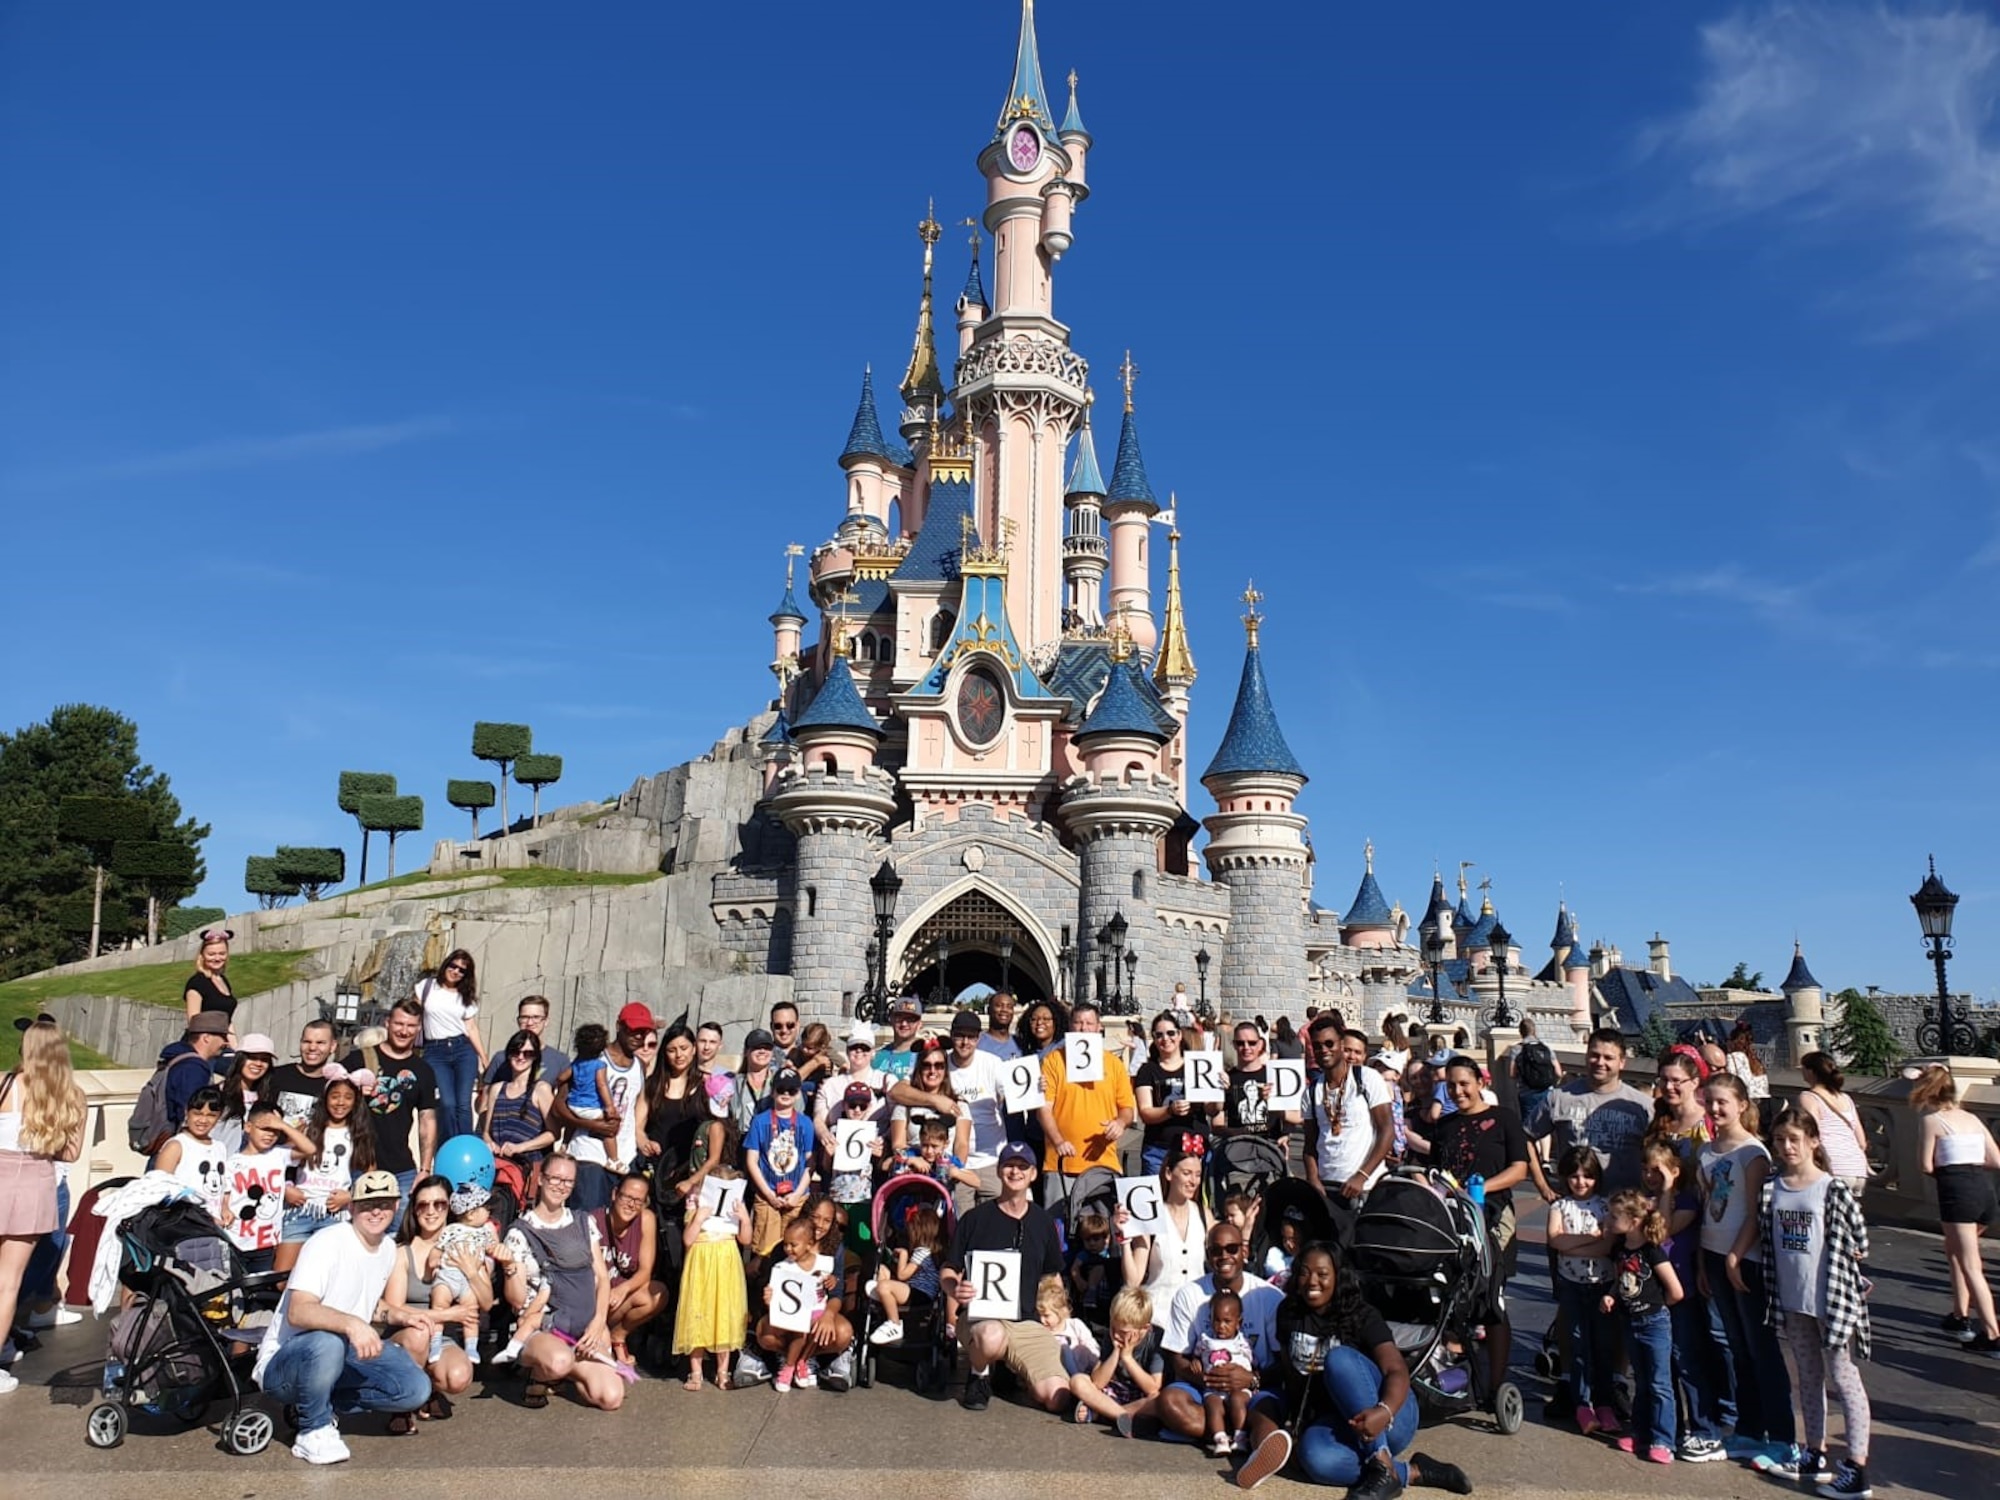 U.S. Air Force Airmen with the 693rd Intelligence, Surveillance, and Reconnaissance Group, and their families, pose for a group photo during a resiliency trip hosted by the Airmen Resiliency Team at Disneyland Paris, Aug. 23-25, 2019. The ART program at Ramstein Air Base, Germany, provides Airmen and families with events like marriage seminars and retreats. (Courtesy photo)